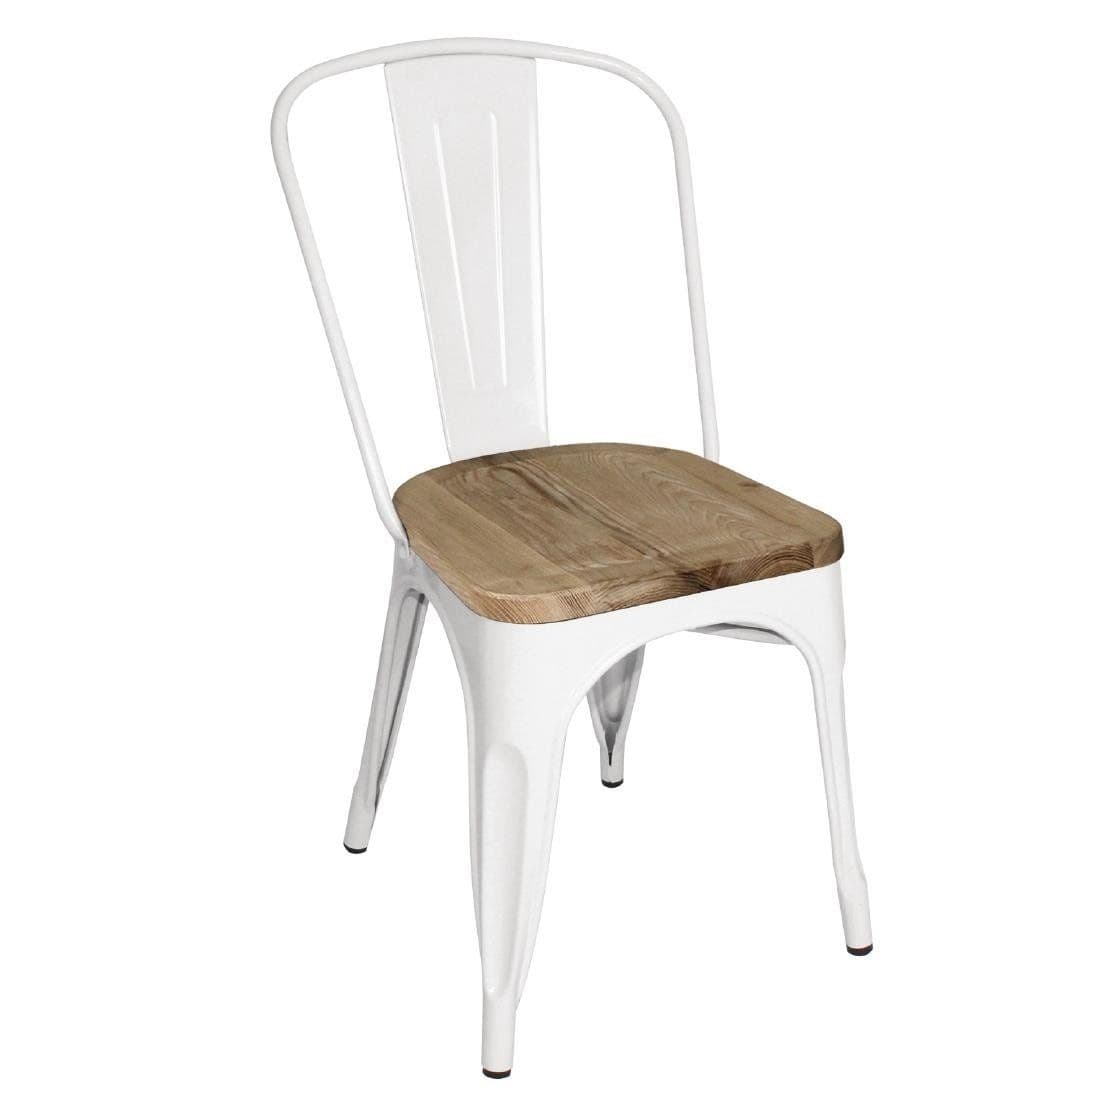 Bolero Bistro Side Chairs with Wooden Seat Pad White (Pack of 4) GM644 JD Catering Equipment Solutions Ltd